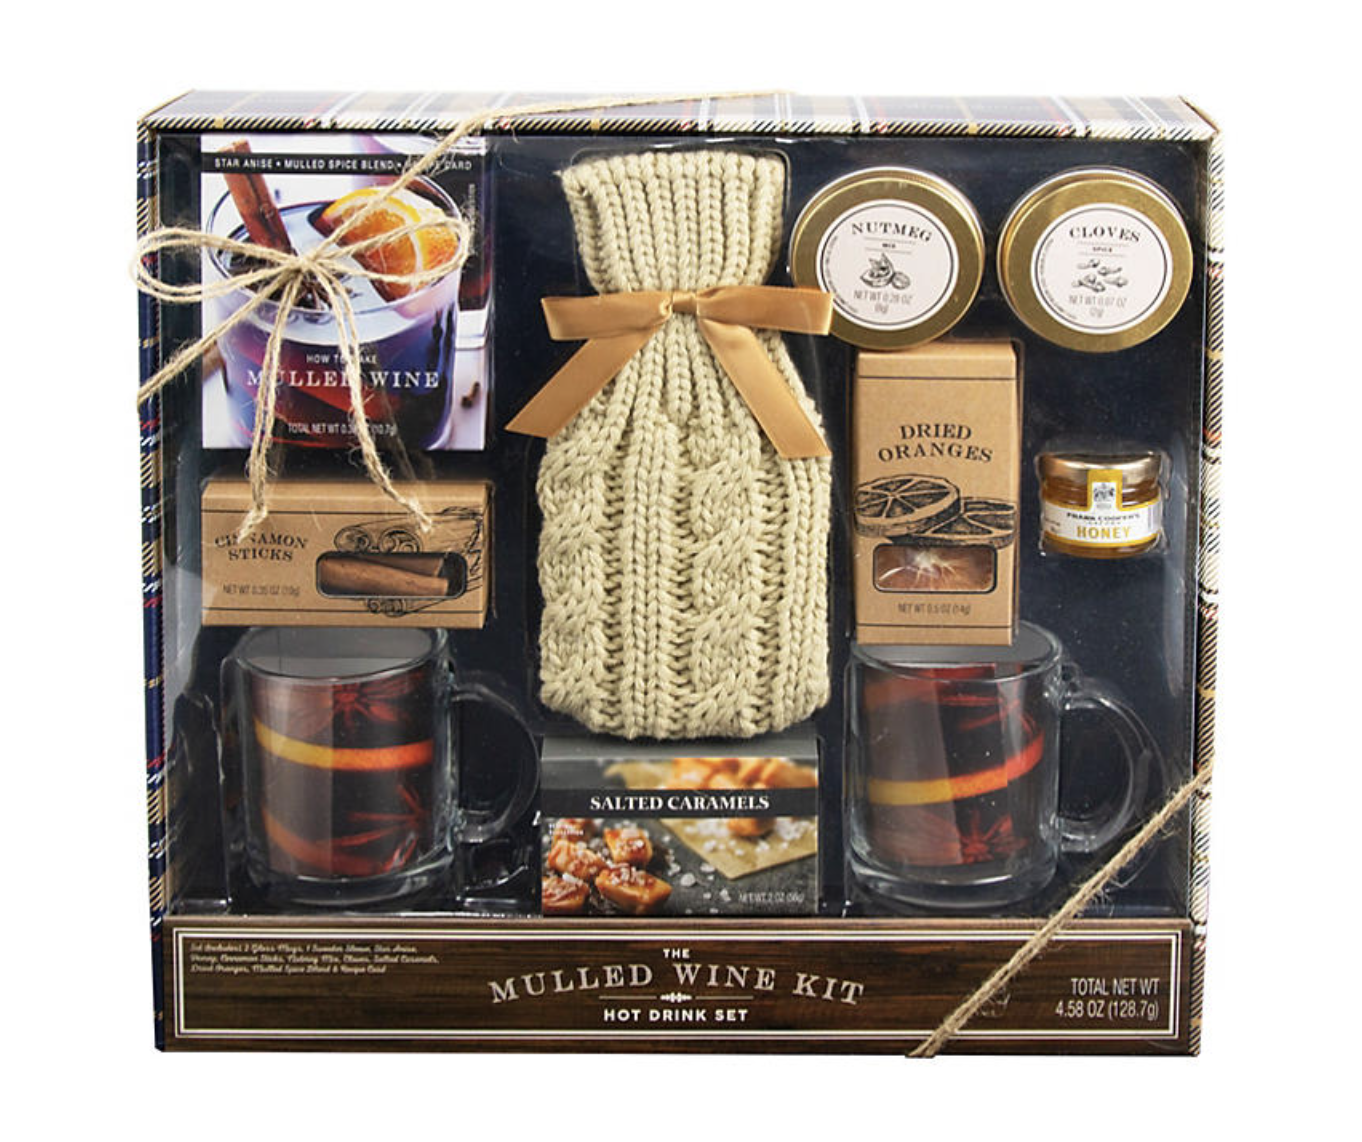 Mulled wine kit with two cups, knit wine bag, aromatic spices, dried oranges, and honey